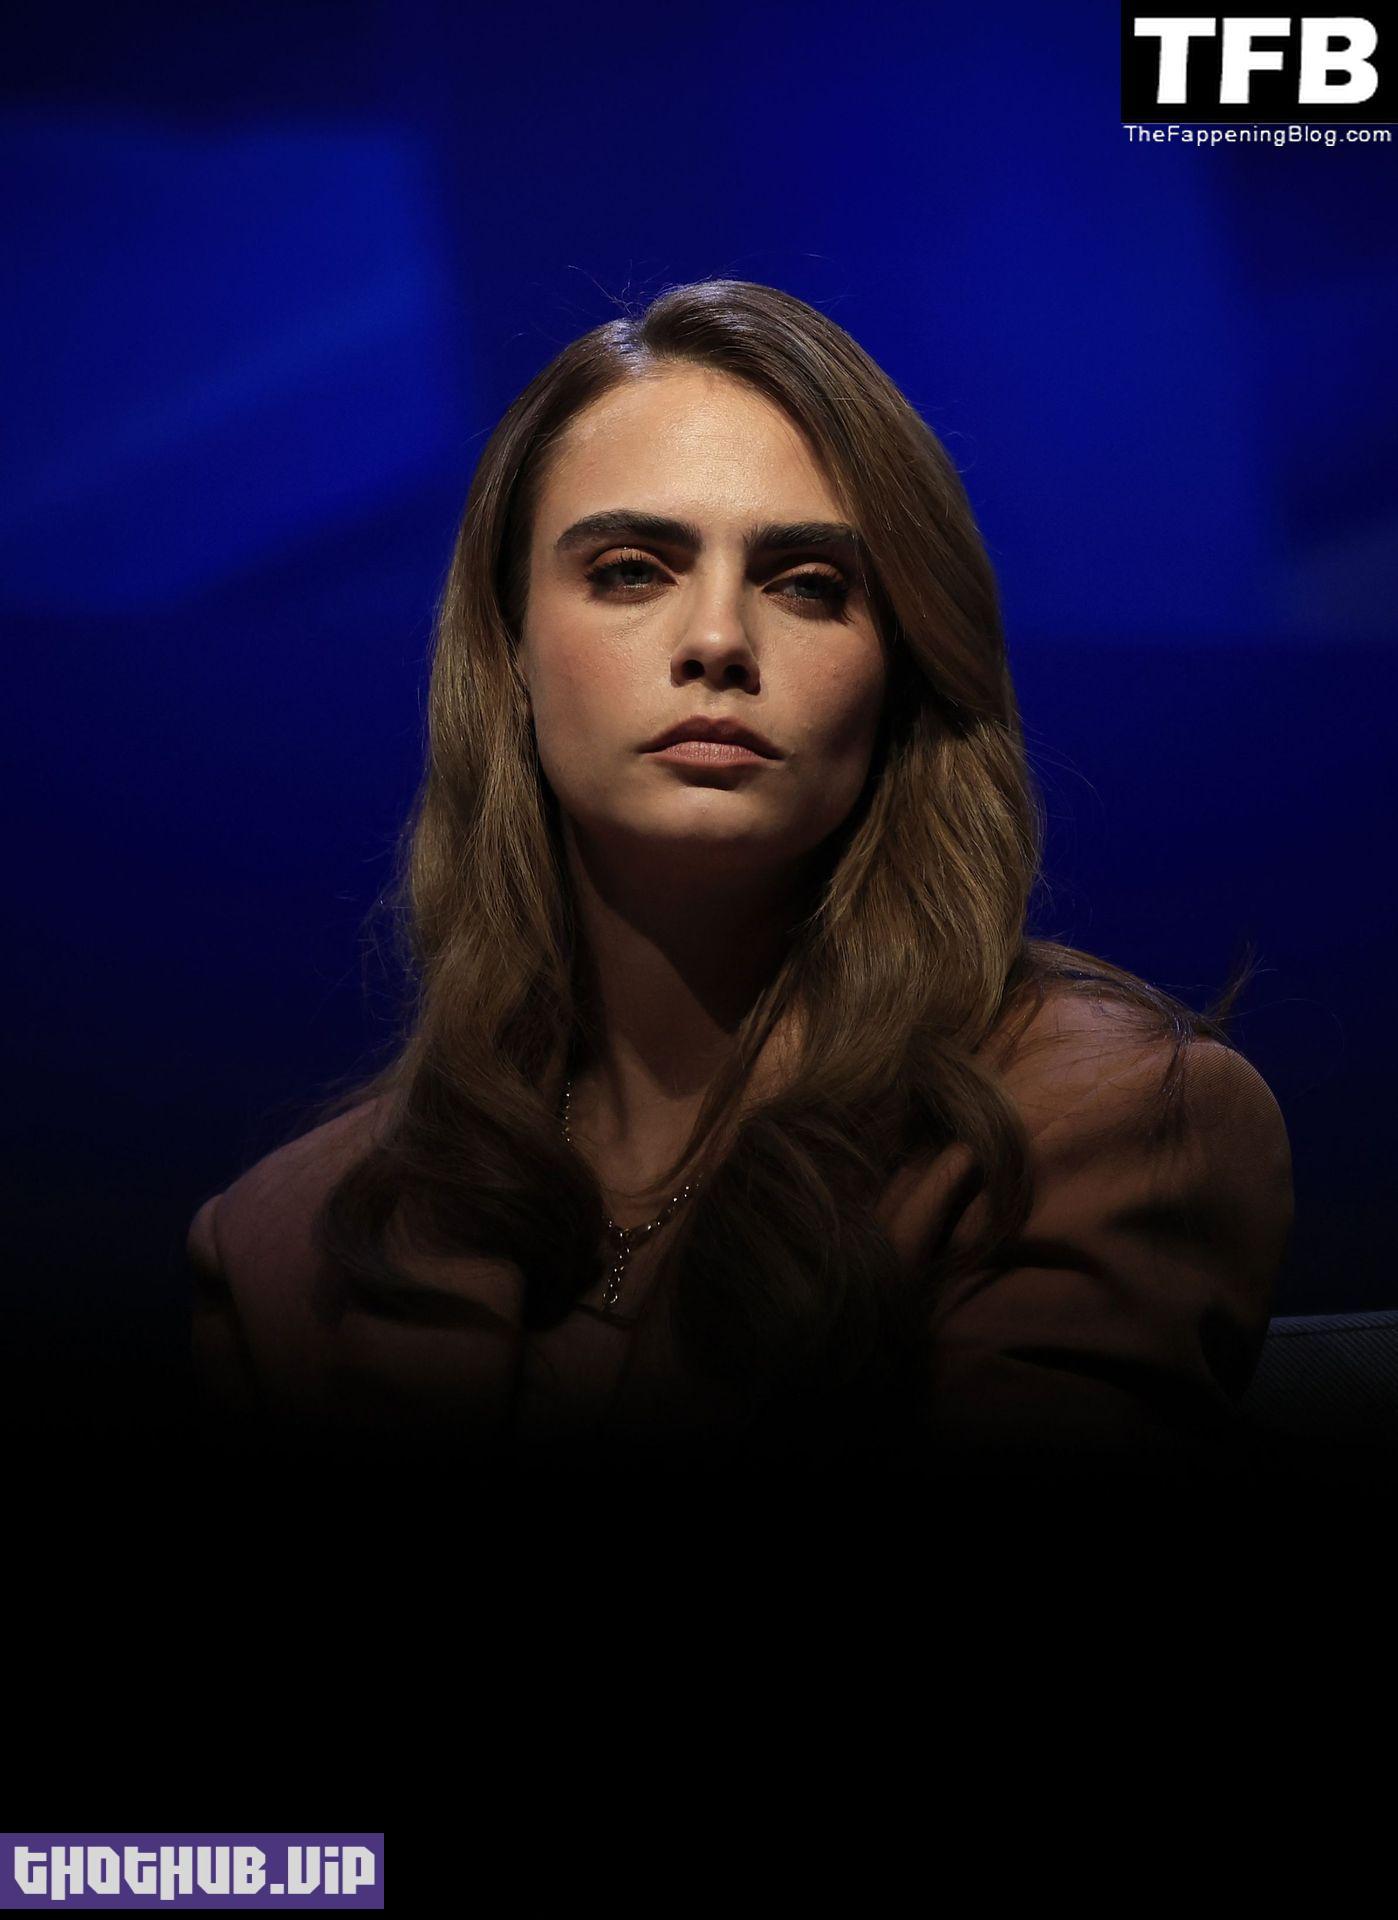 Cara Delevingne Sexy The Fappening Blog 10 2